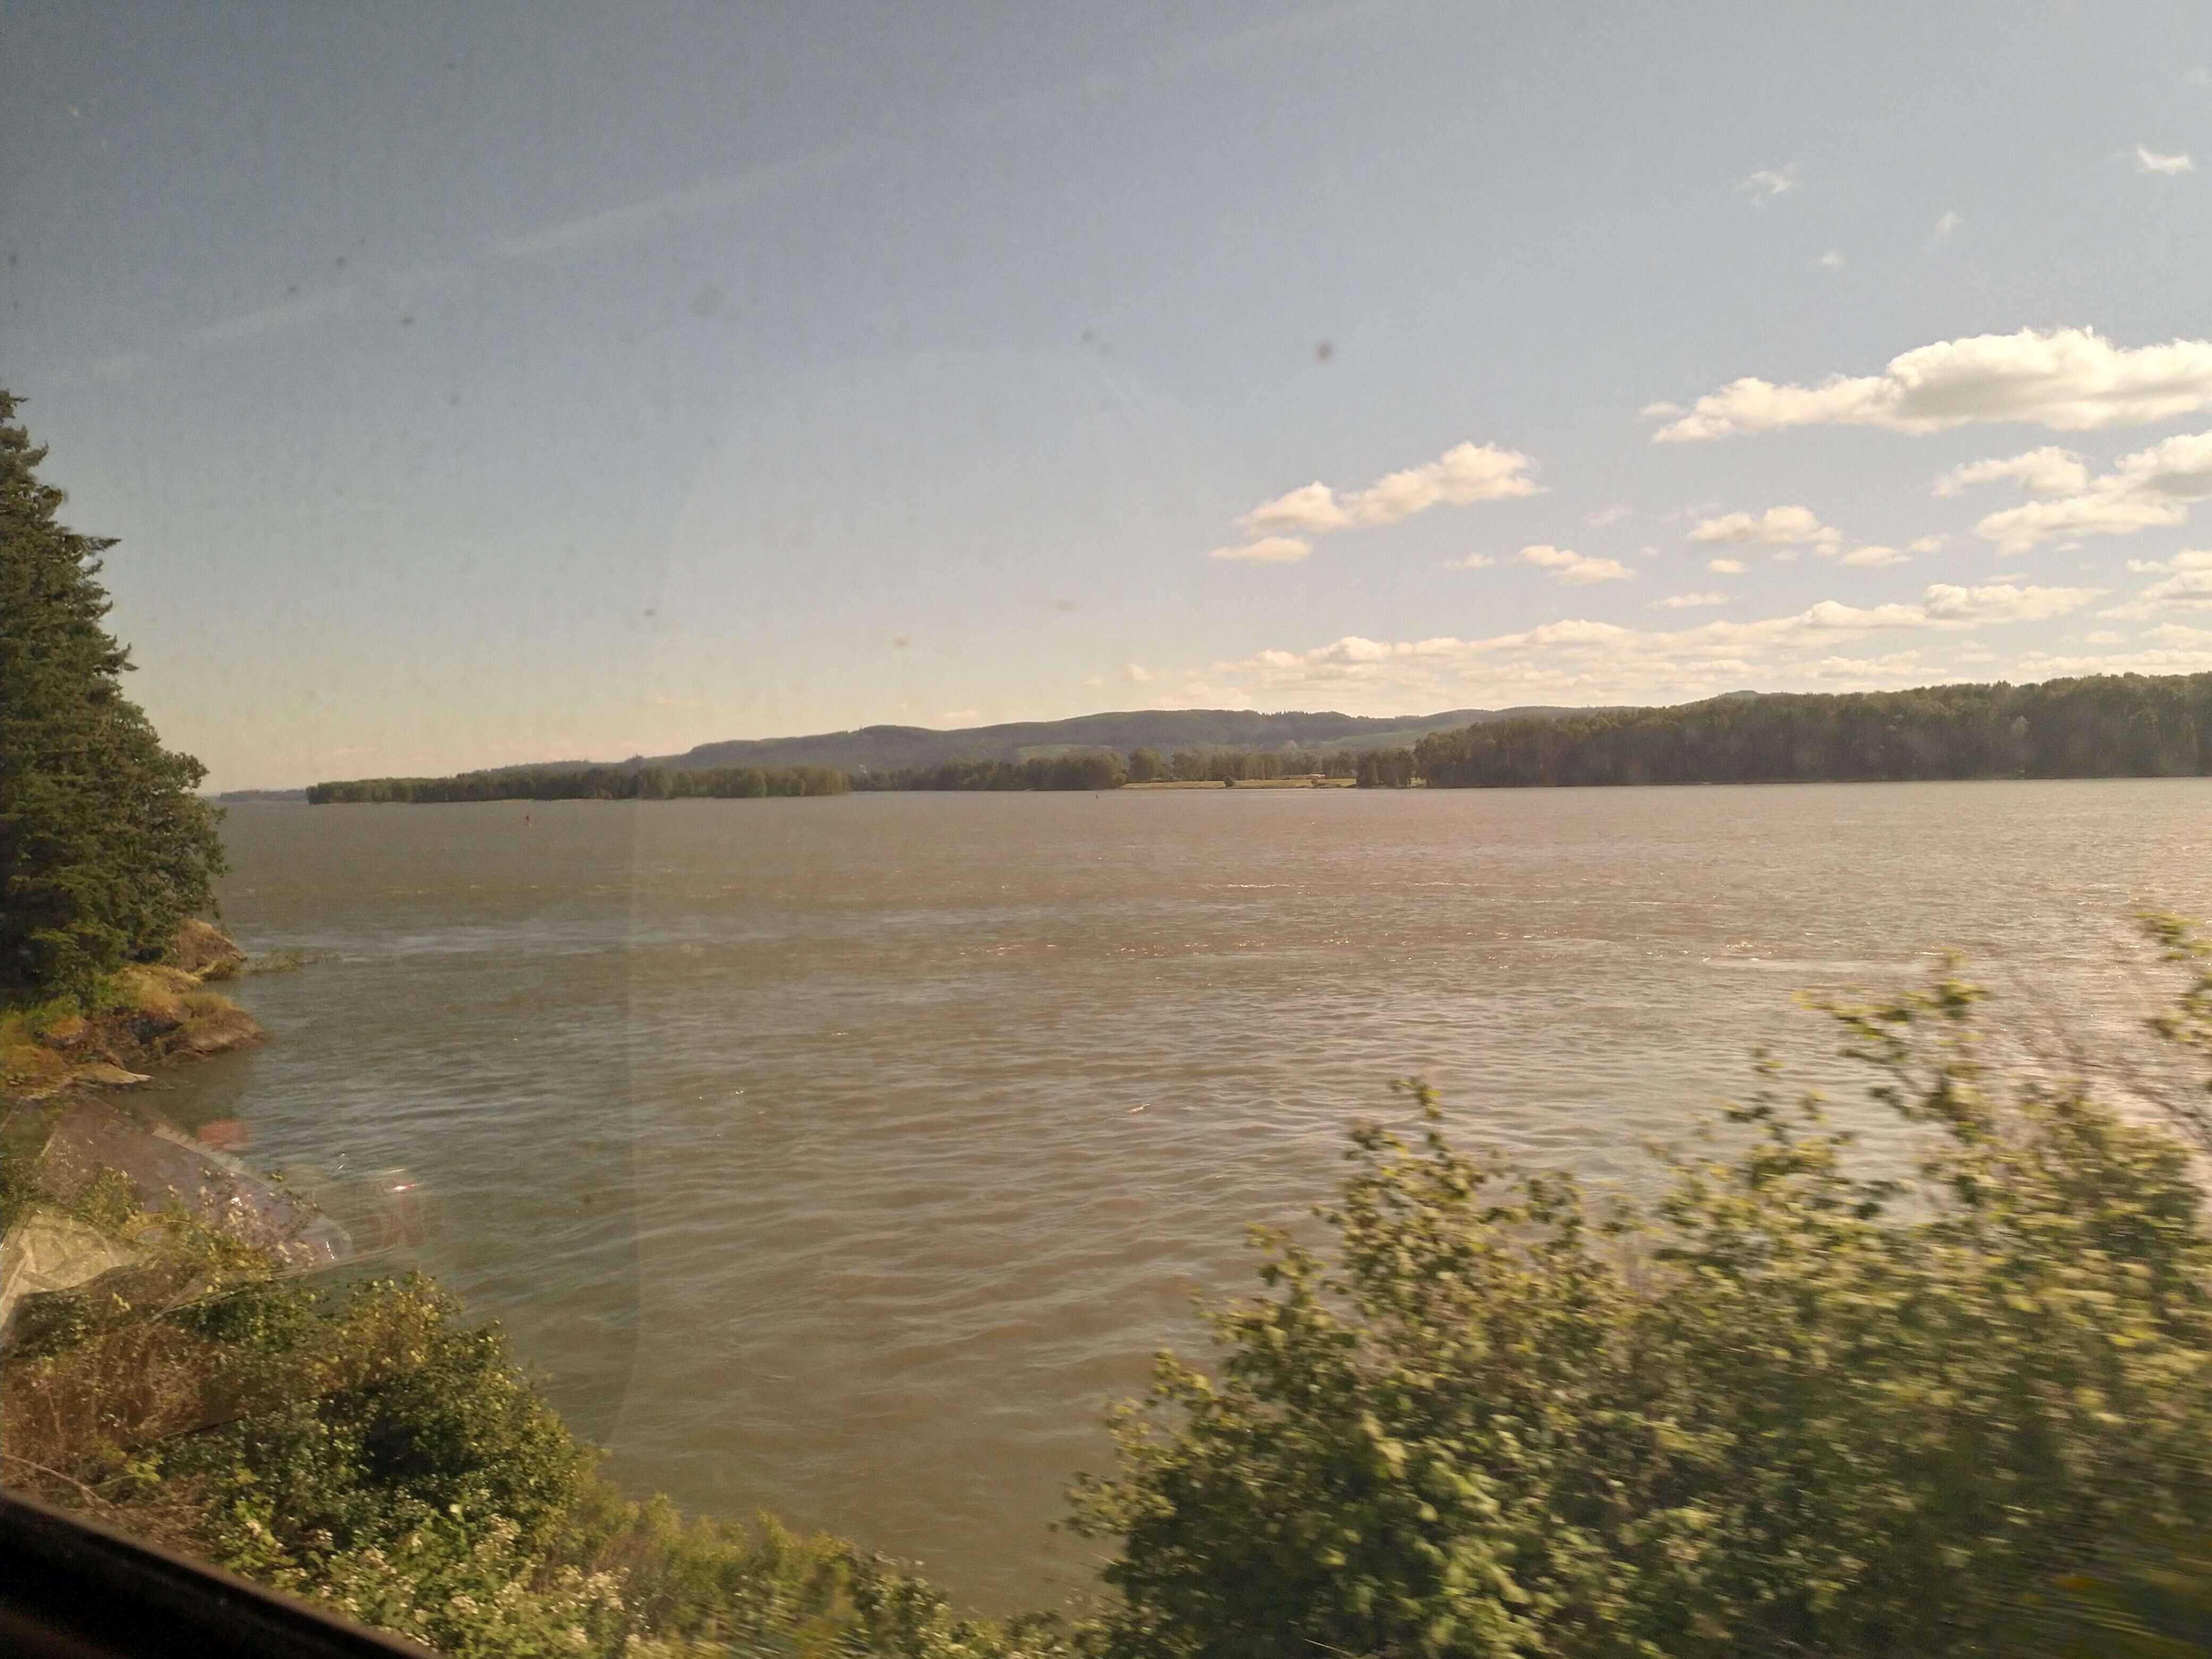 The view out of the window on the train between Seattle and Portland.